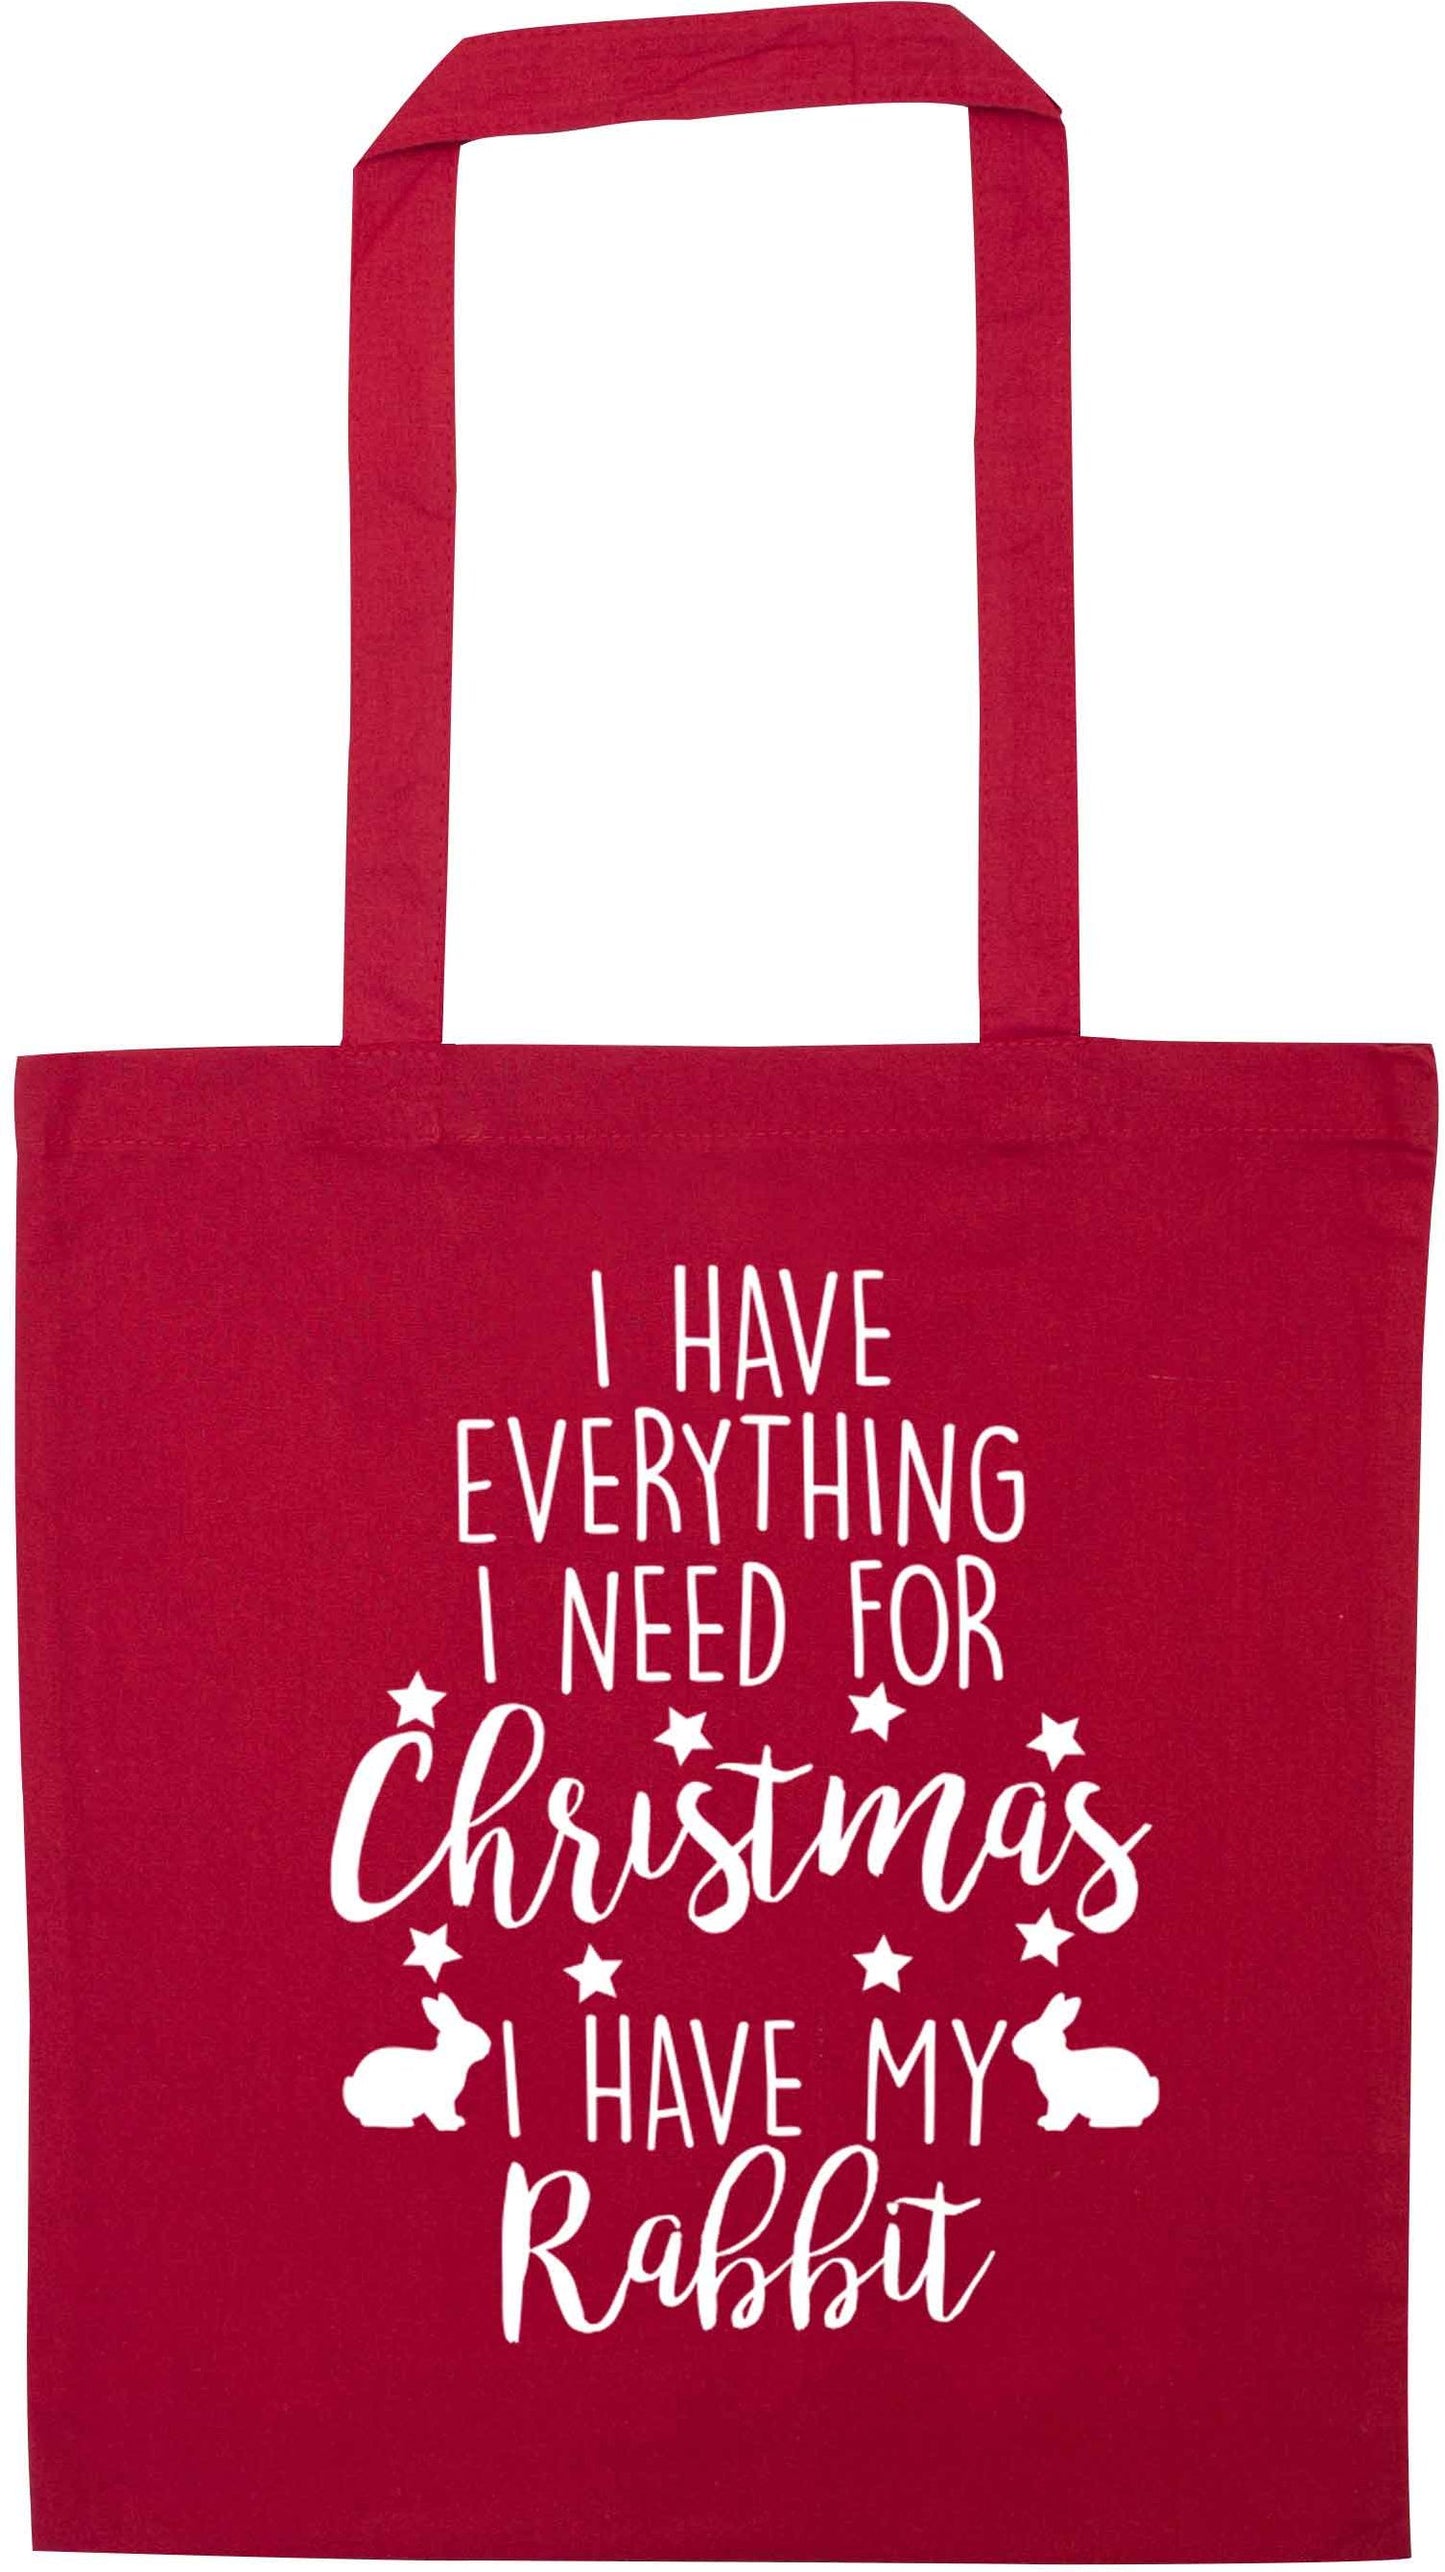 I have everything I need for Christmas I have my rabbit red tote bag